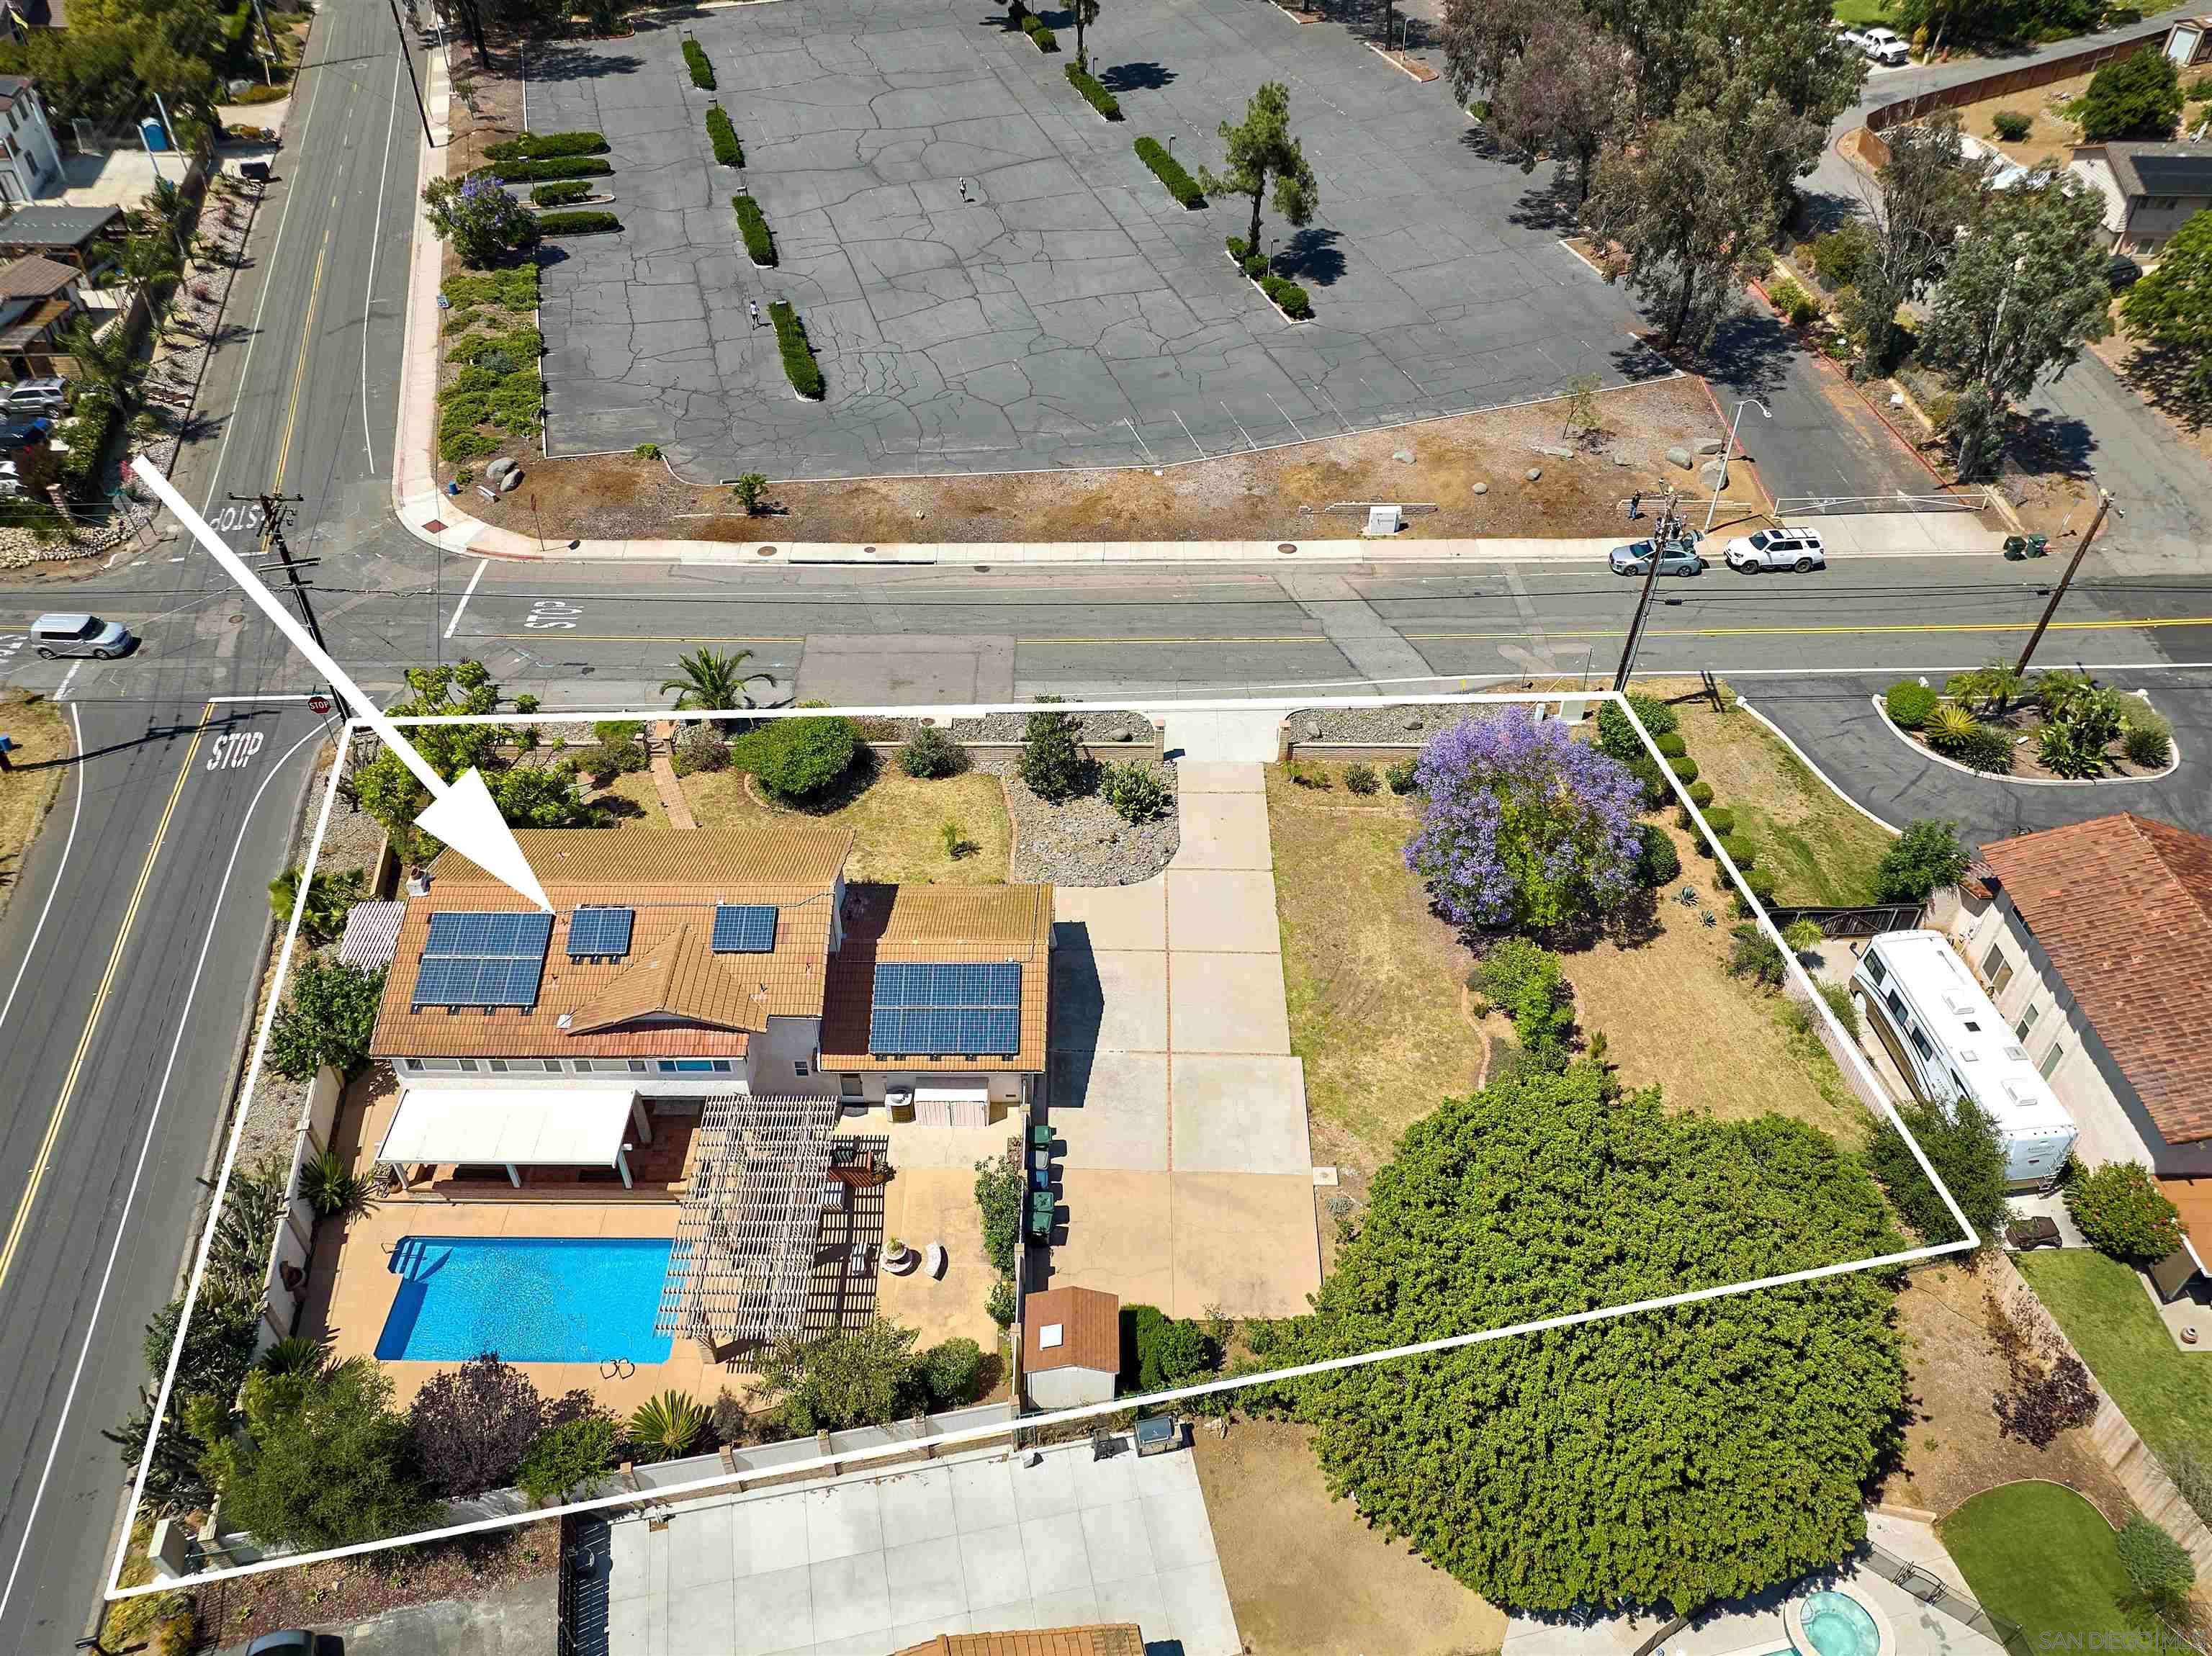 an aerial view of a houses with outdoor space